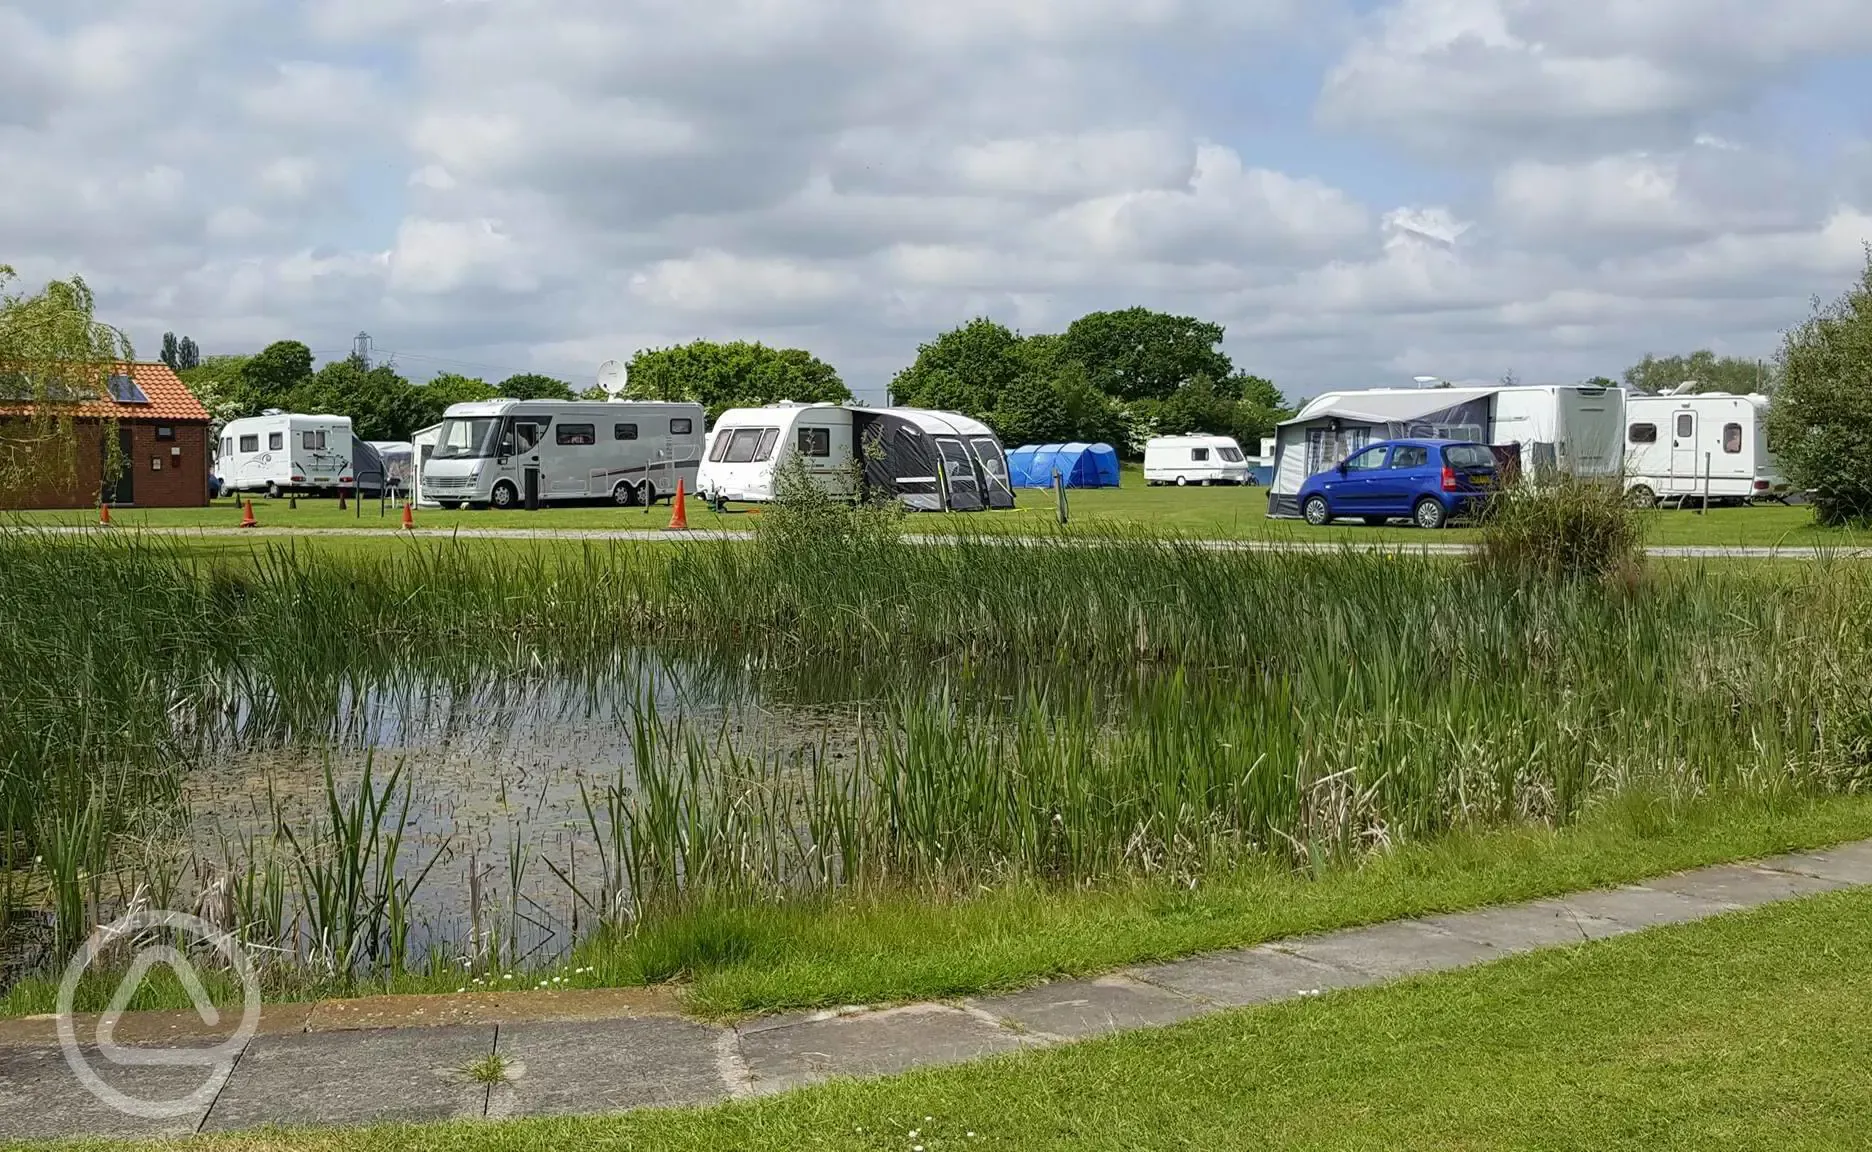 Hardstanding and grass touring pitches by the lake